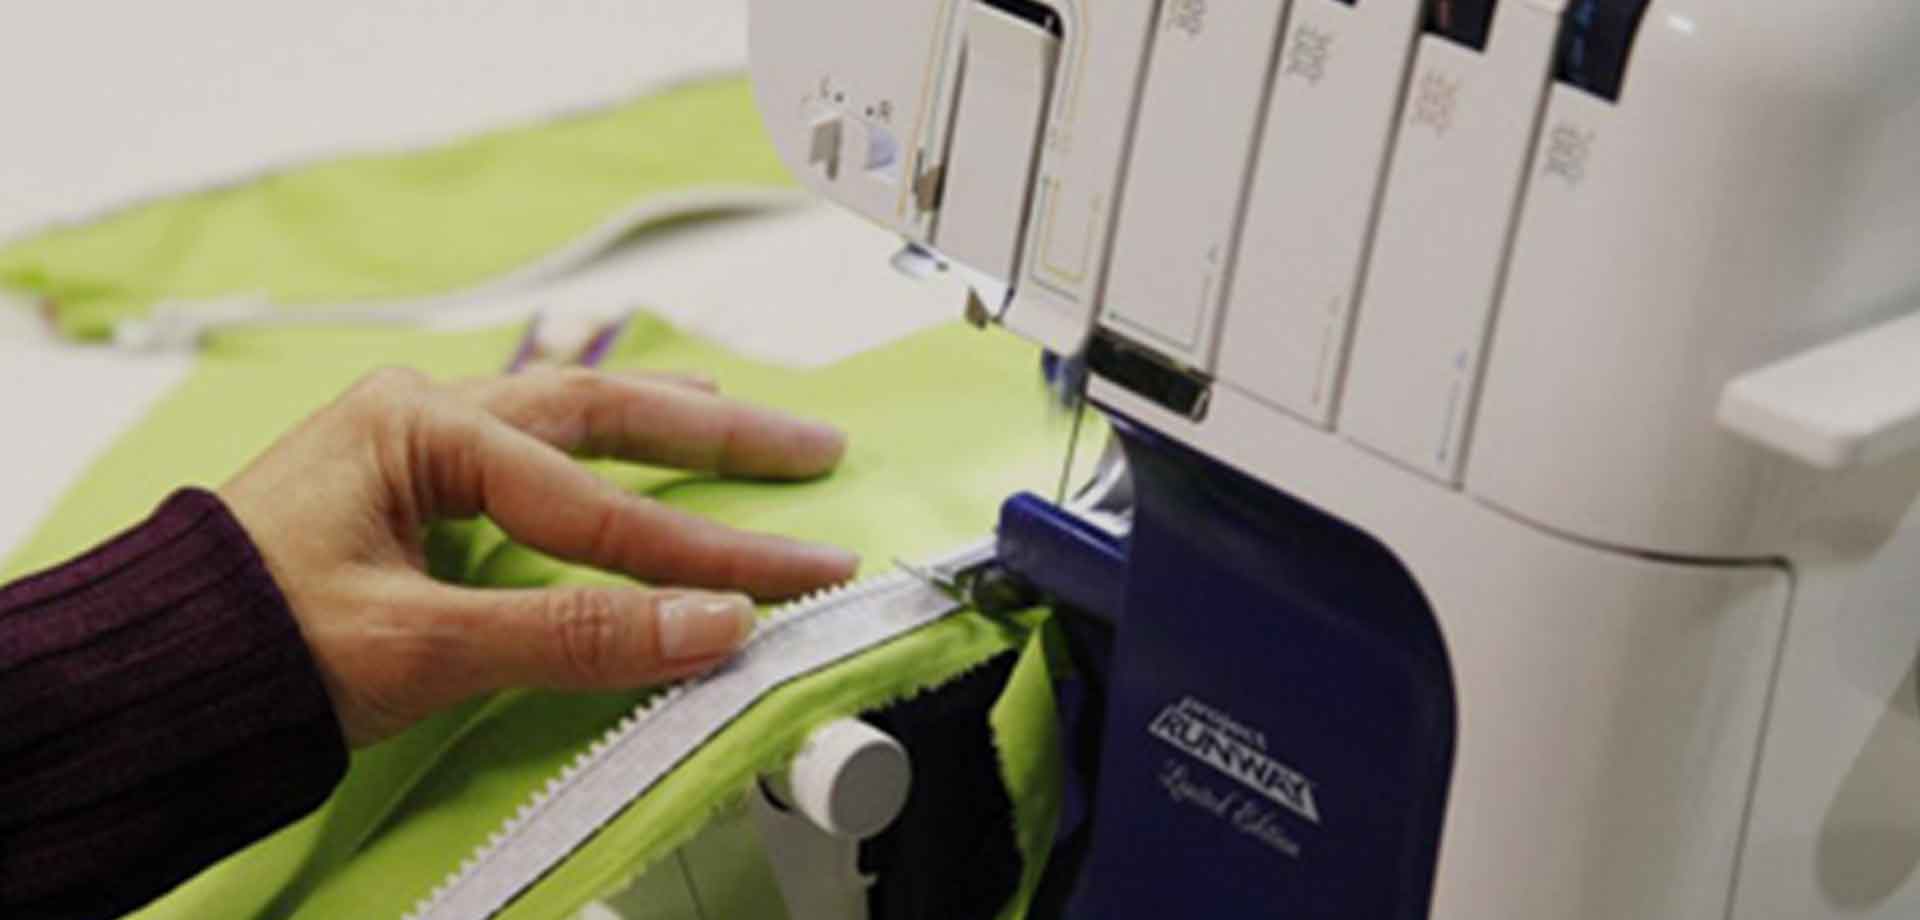 Learn the latest sewing tips and tricks